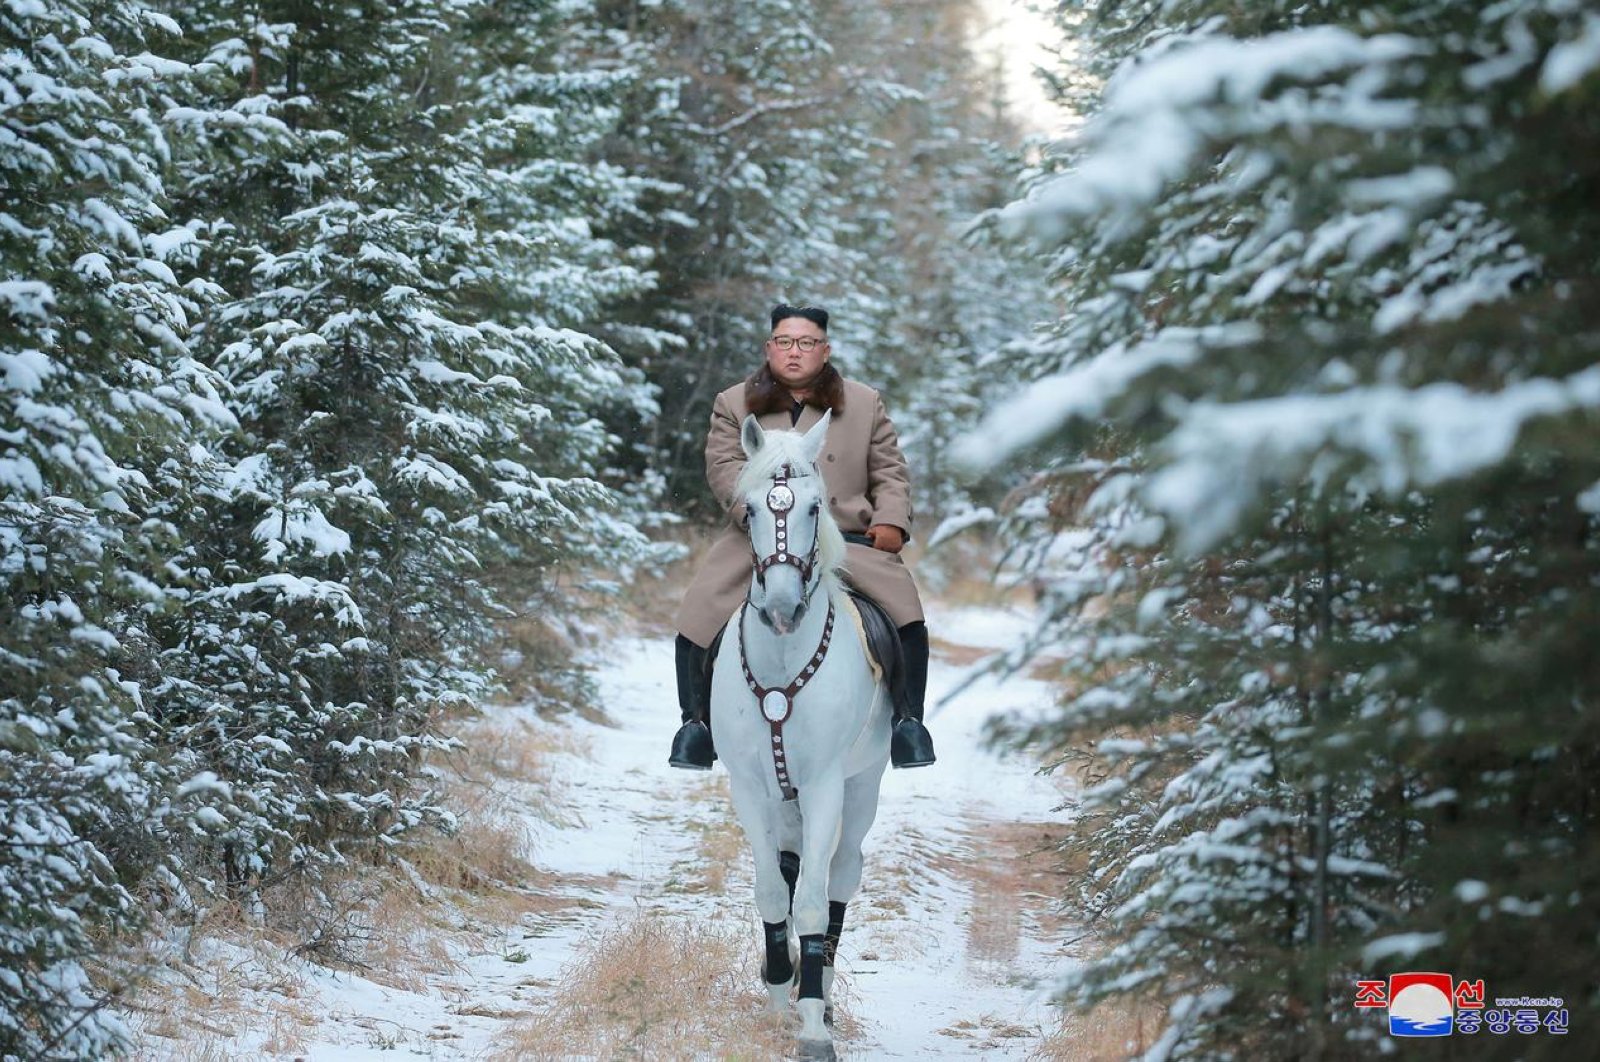 North Korean leader Kim Jong Un rides a horse during snowfall on Paektu Mountain in this image released by North Korea's Korean Central News Agency (KCNA), Oct. 16, 2019. (KCNA via REUTERS)